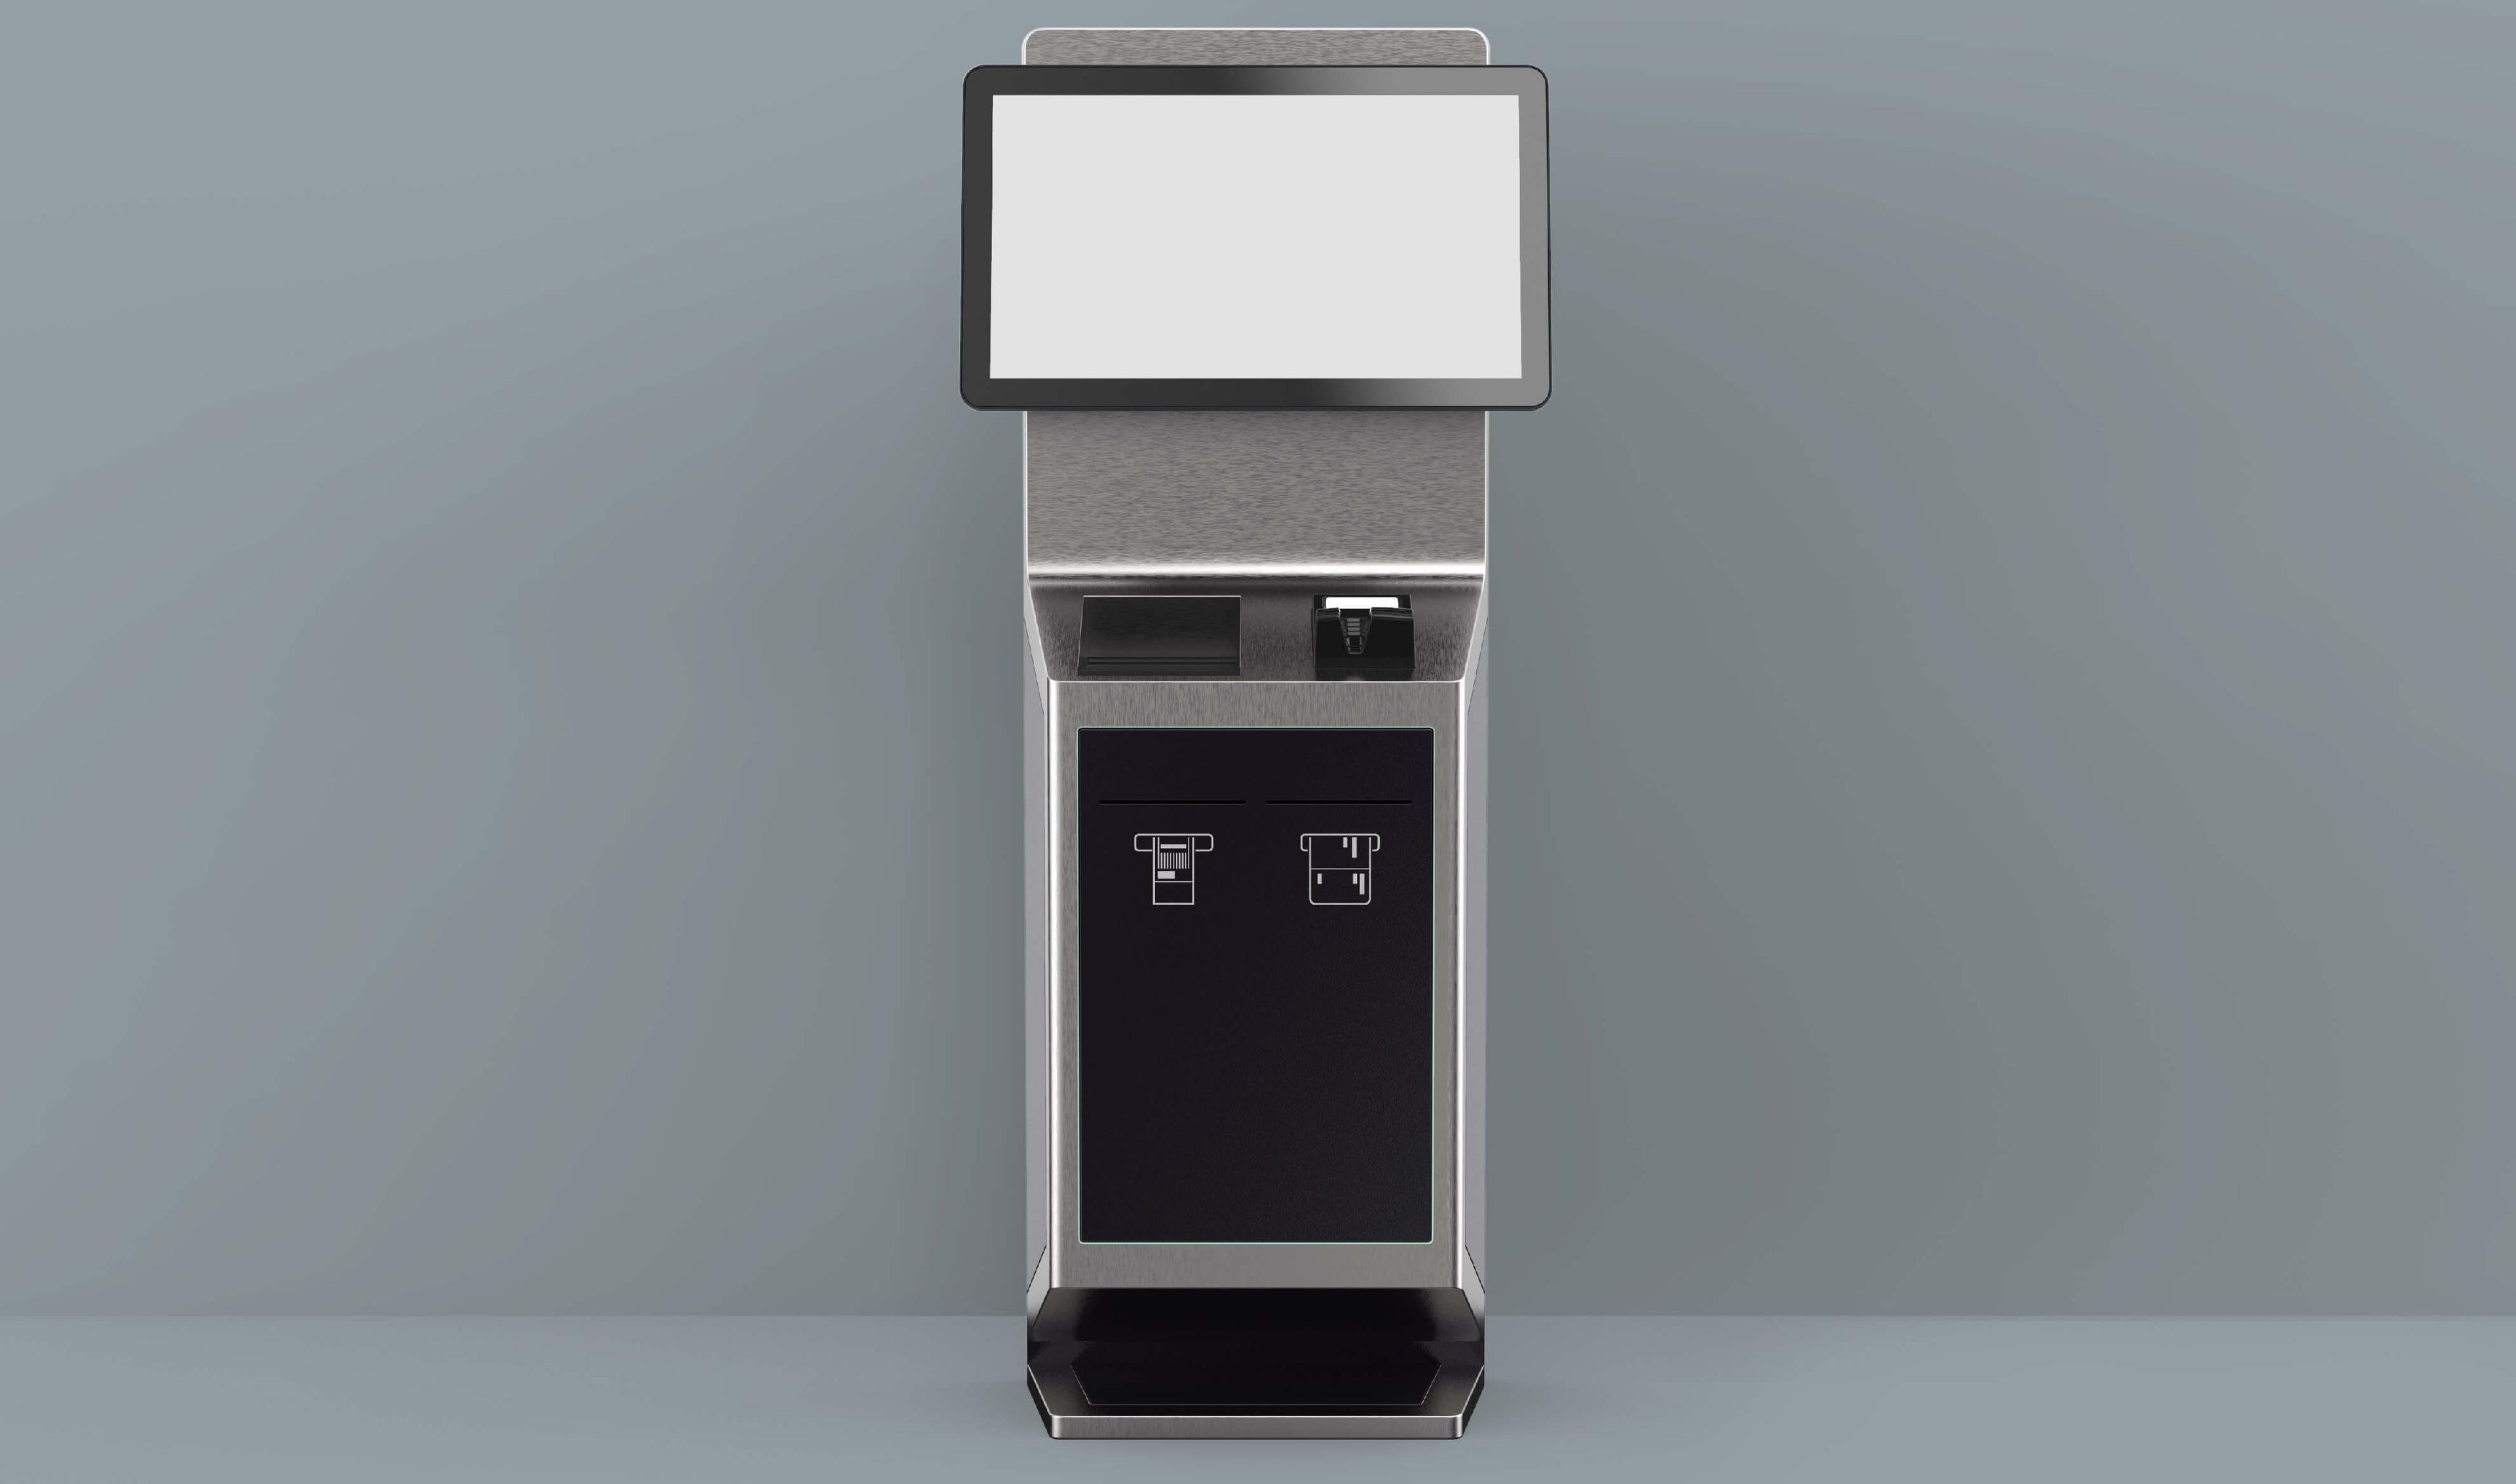 Product INK Aviation Compact Check In Kiosk | Product Design Work | biild image